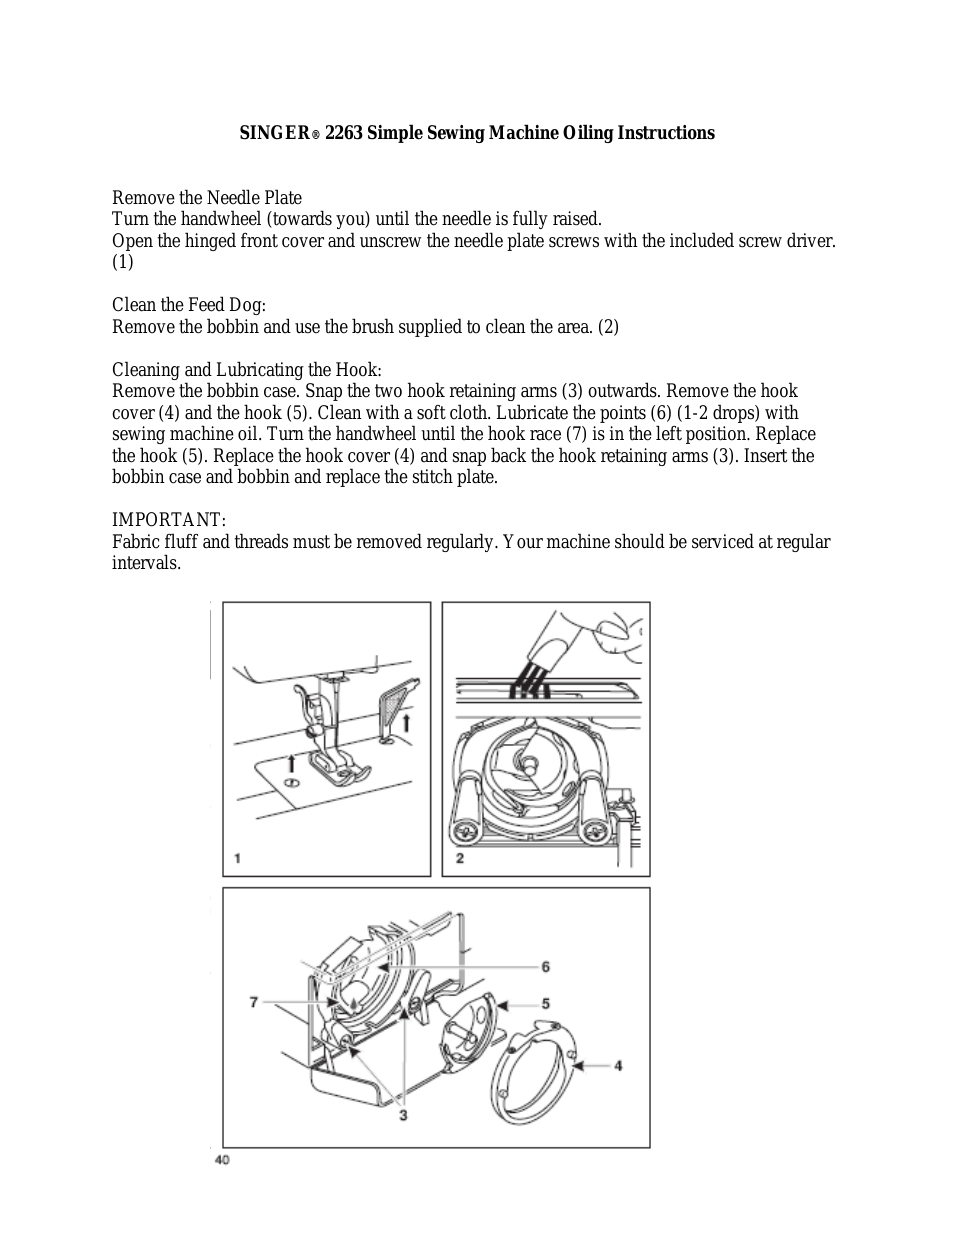 2273 Oiling SIMPLE Instruction Manual (Page 1)